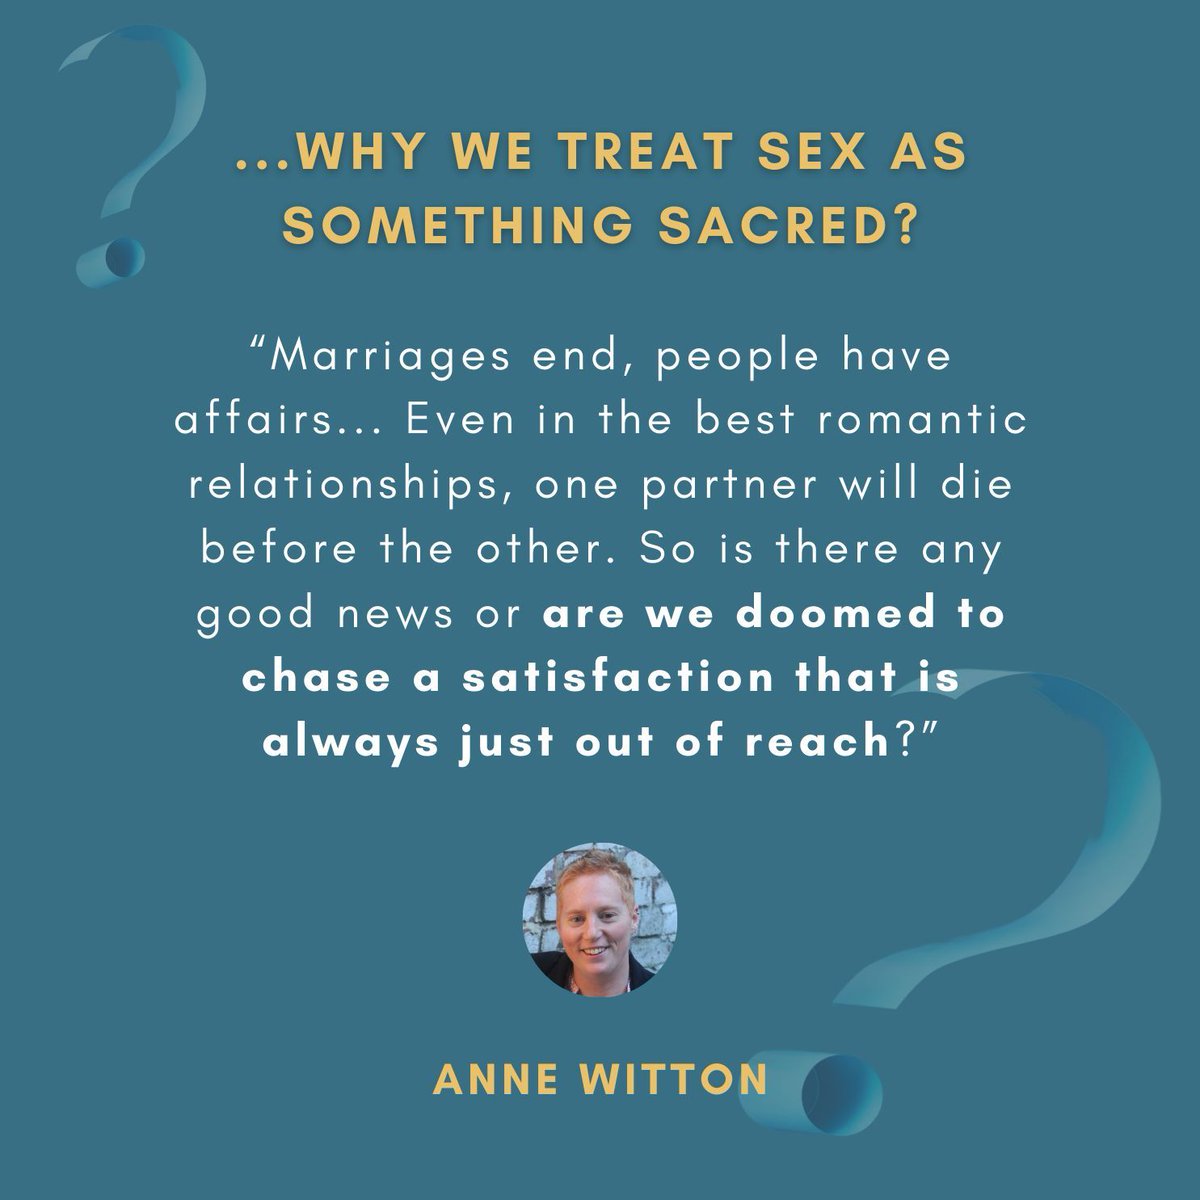 Have you ever wondered why we all treat sex as something sacred? Is this a clue to something bigger? Check out the new book 'Have You Ever Wondered?' from @solascpc — it's a great gift for a friend to start questions about faith, using questions like this one.